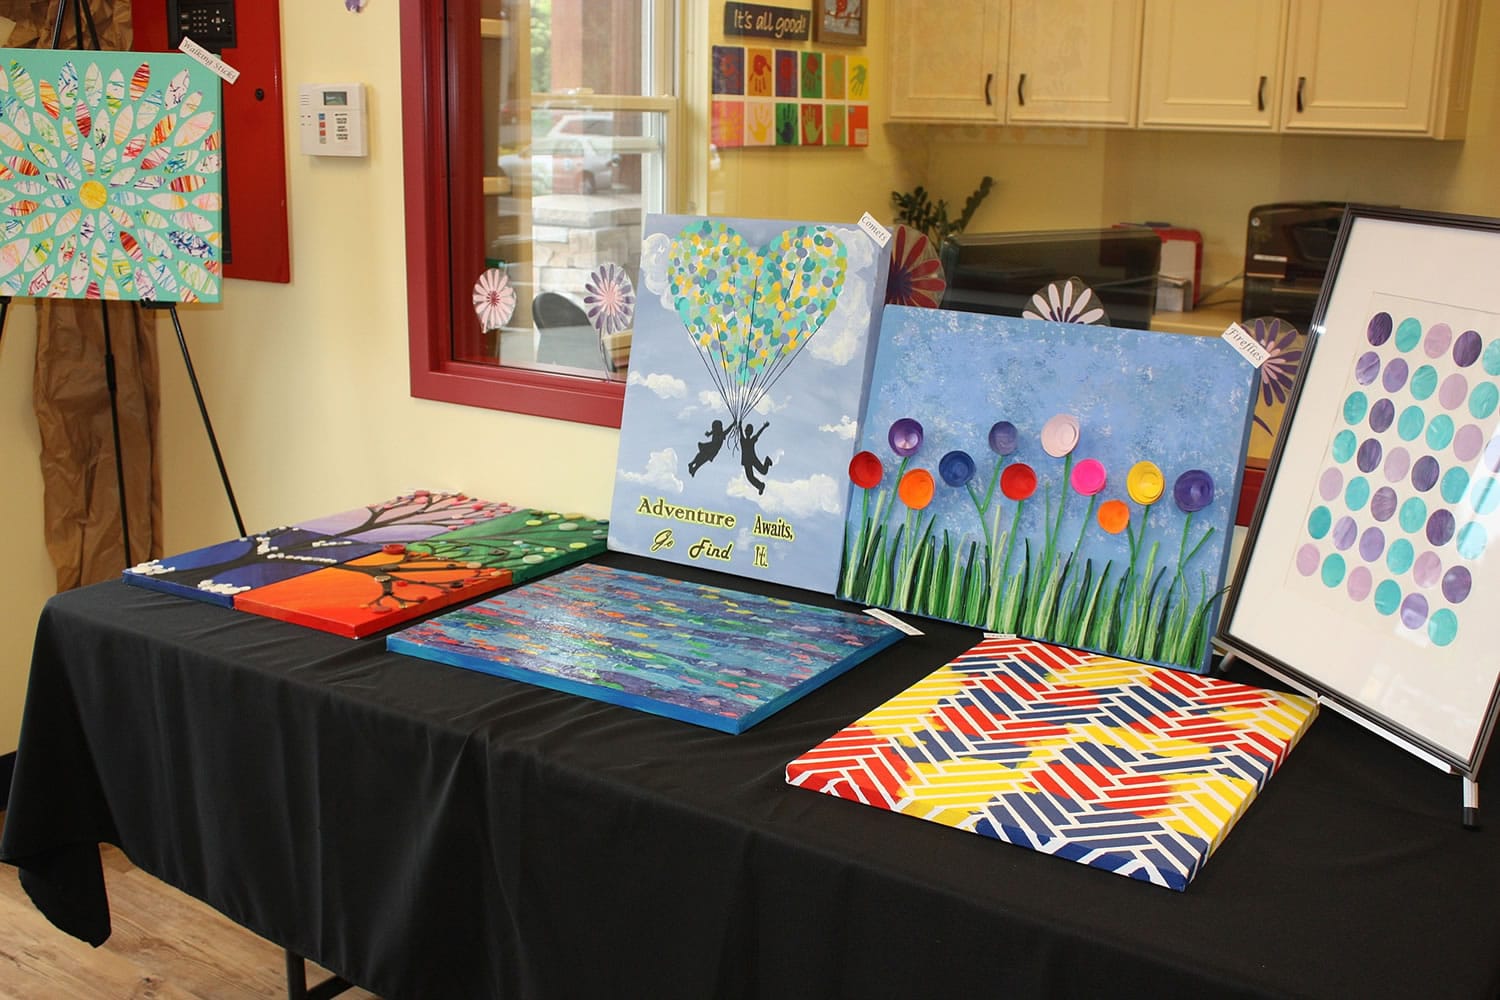 Salmon Creek: Some of the student artwork auctioned off at the Goddard School's Children's Art Gala, which raised $6,200 for Legacy Hospital's Child Abuse Assessment Team.